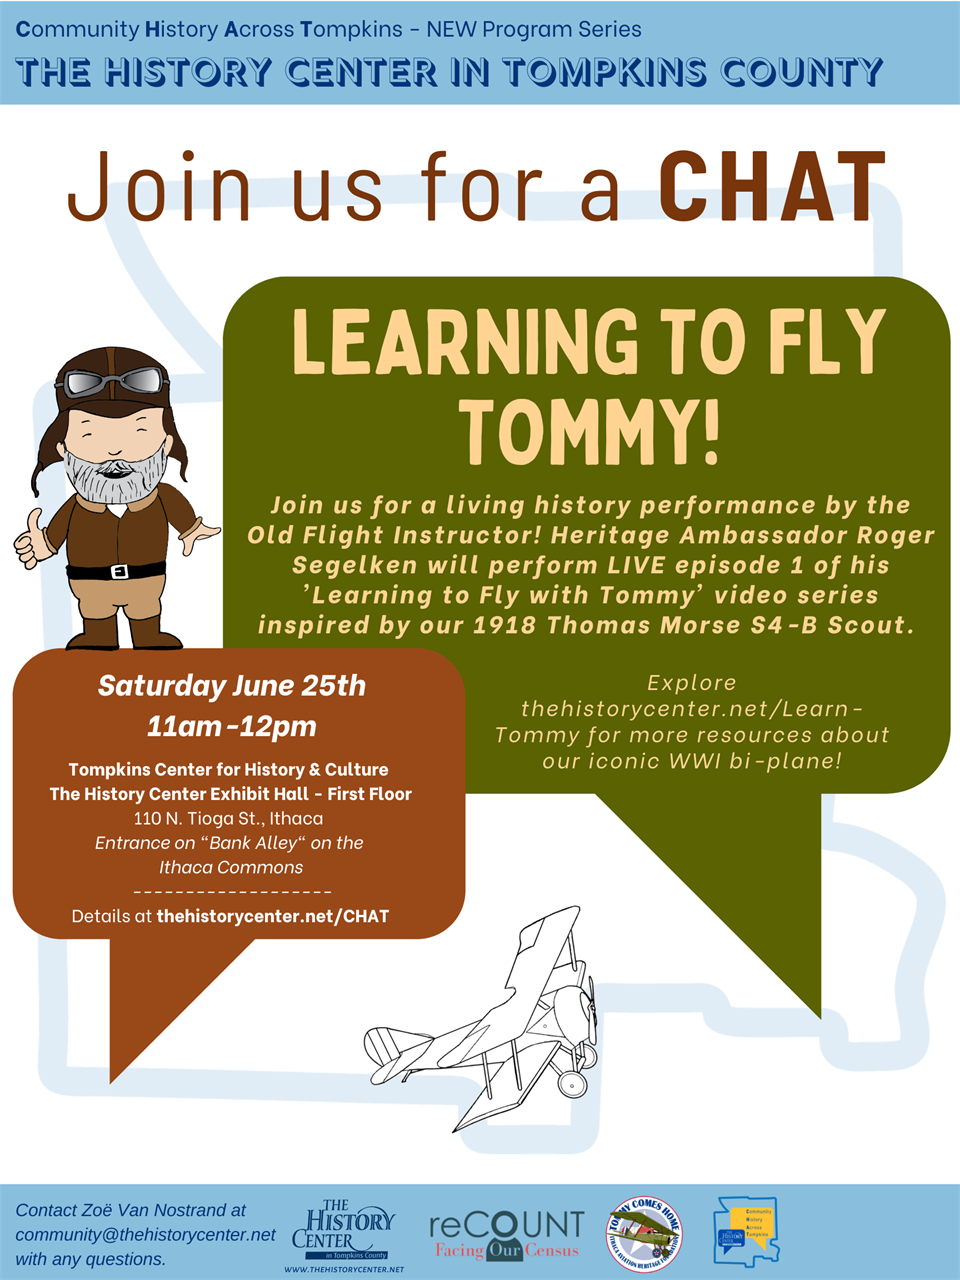 Flyer advertising previous CHAT on Learning How to Fly Tommy in the CAP ArtSpace in the Tompkins Center for History and Culture. 